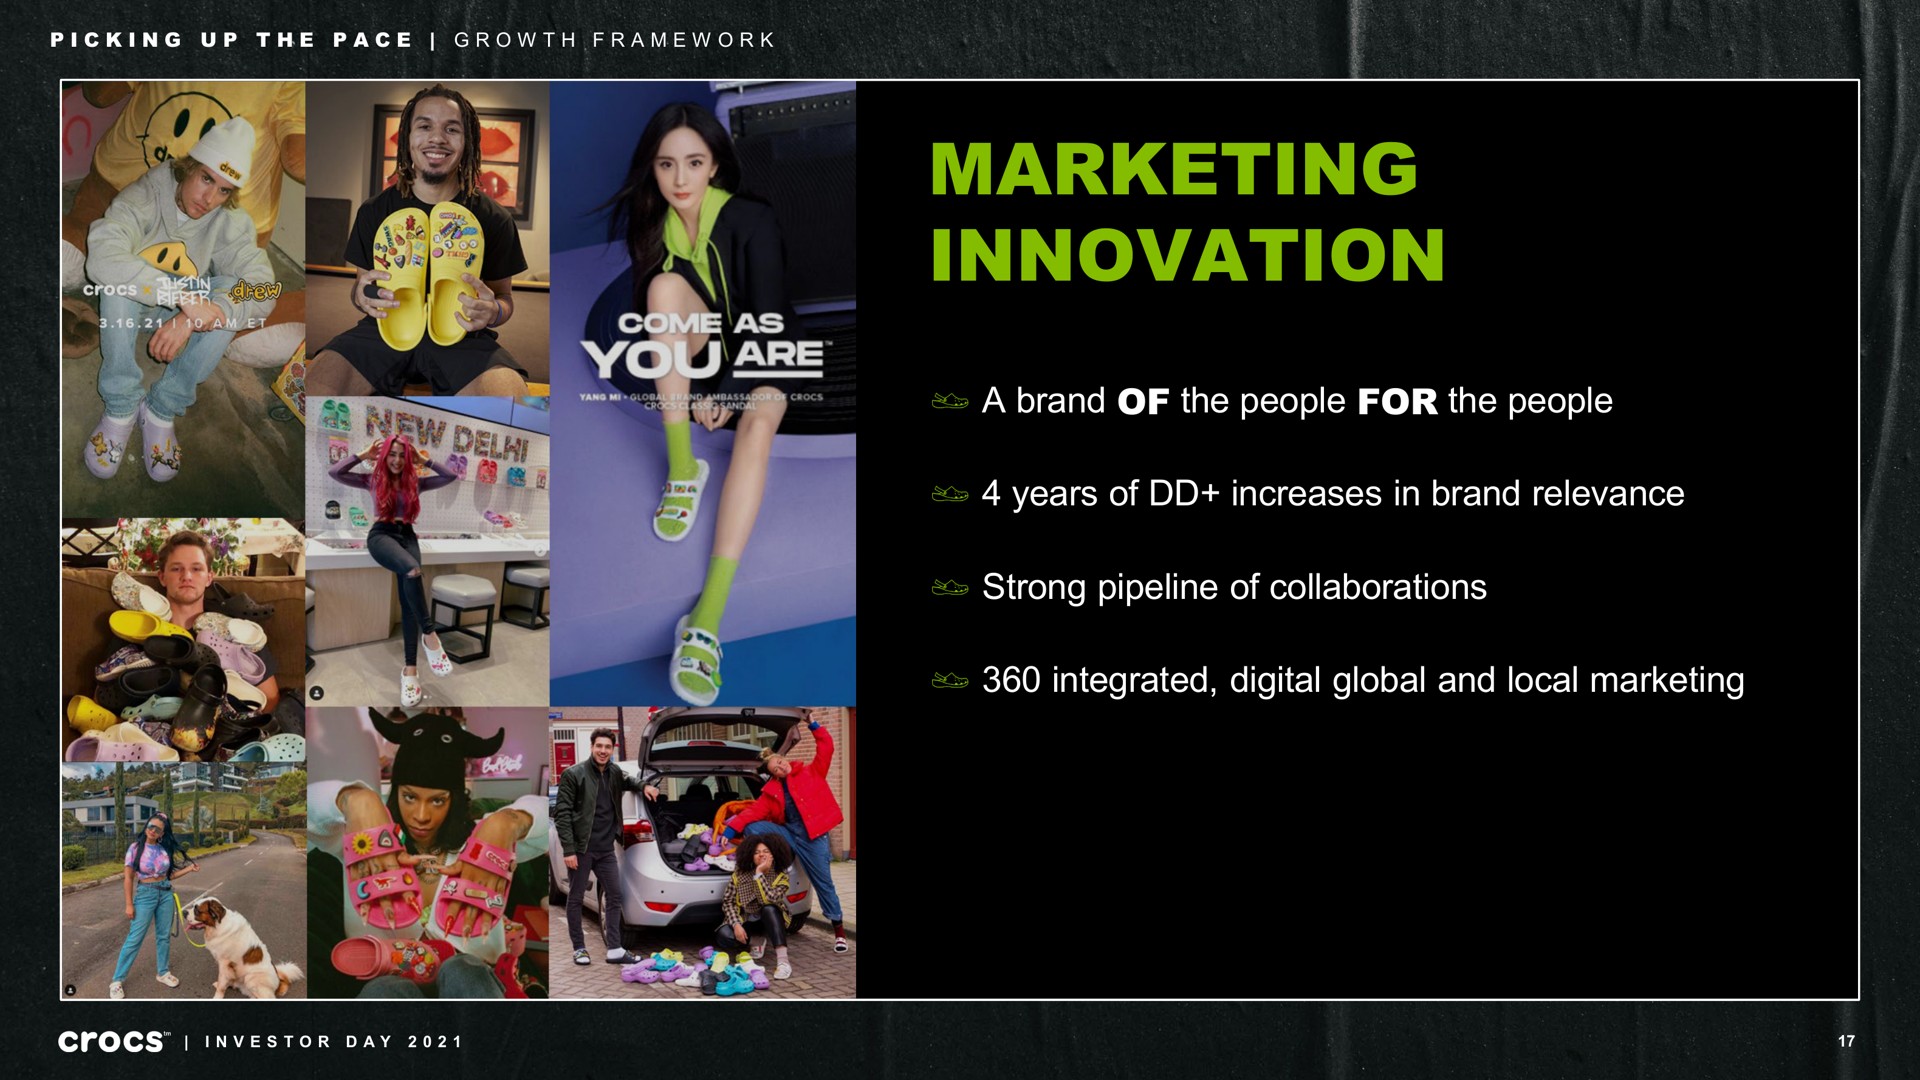 marketing innovation a brand of the people for the people years of increases in brand relevance strong pipeline of collaborations integrated digital global and local marketing picking up pace growth framework investor day | Crocs